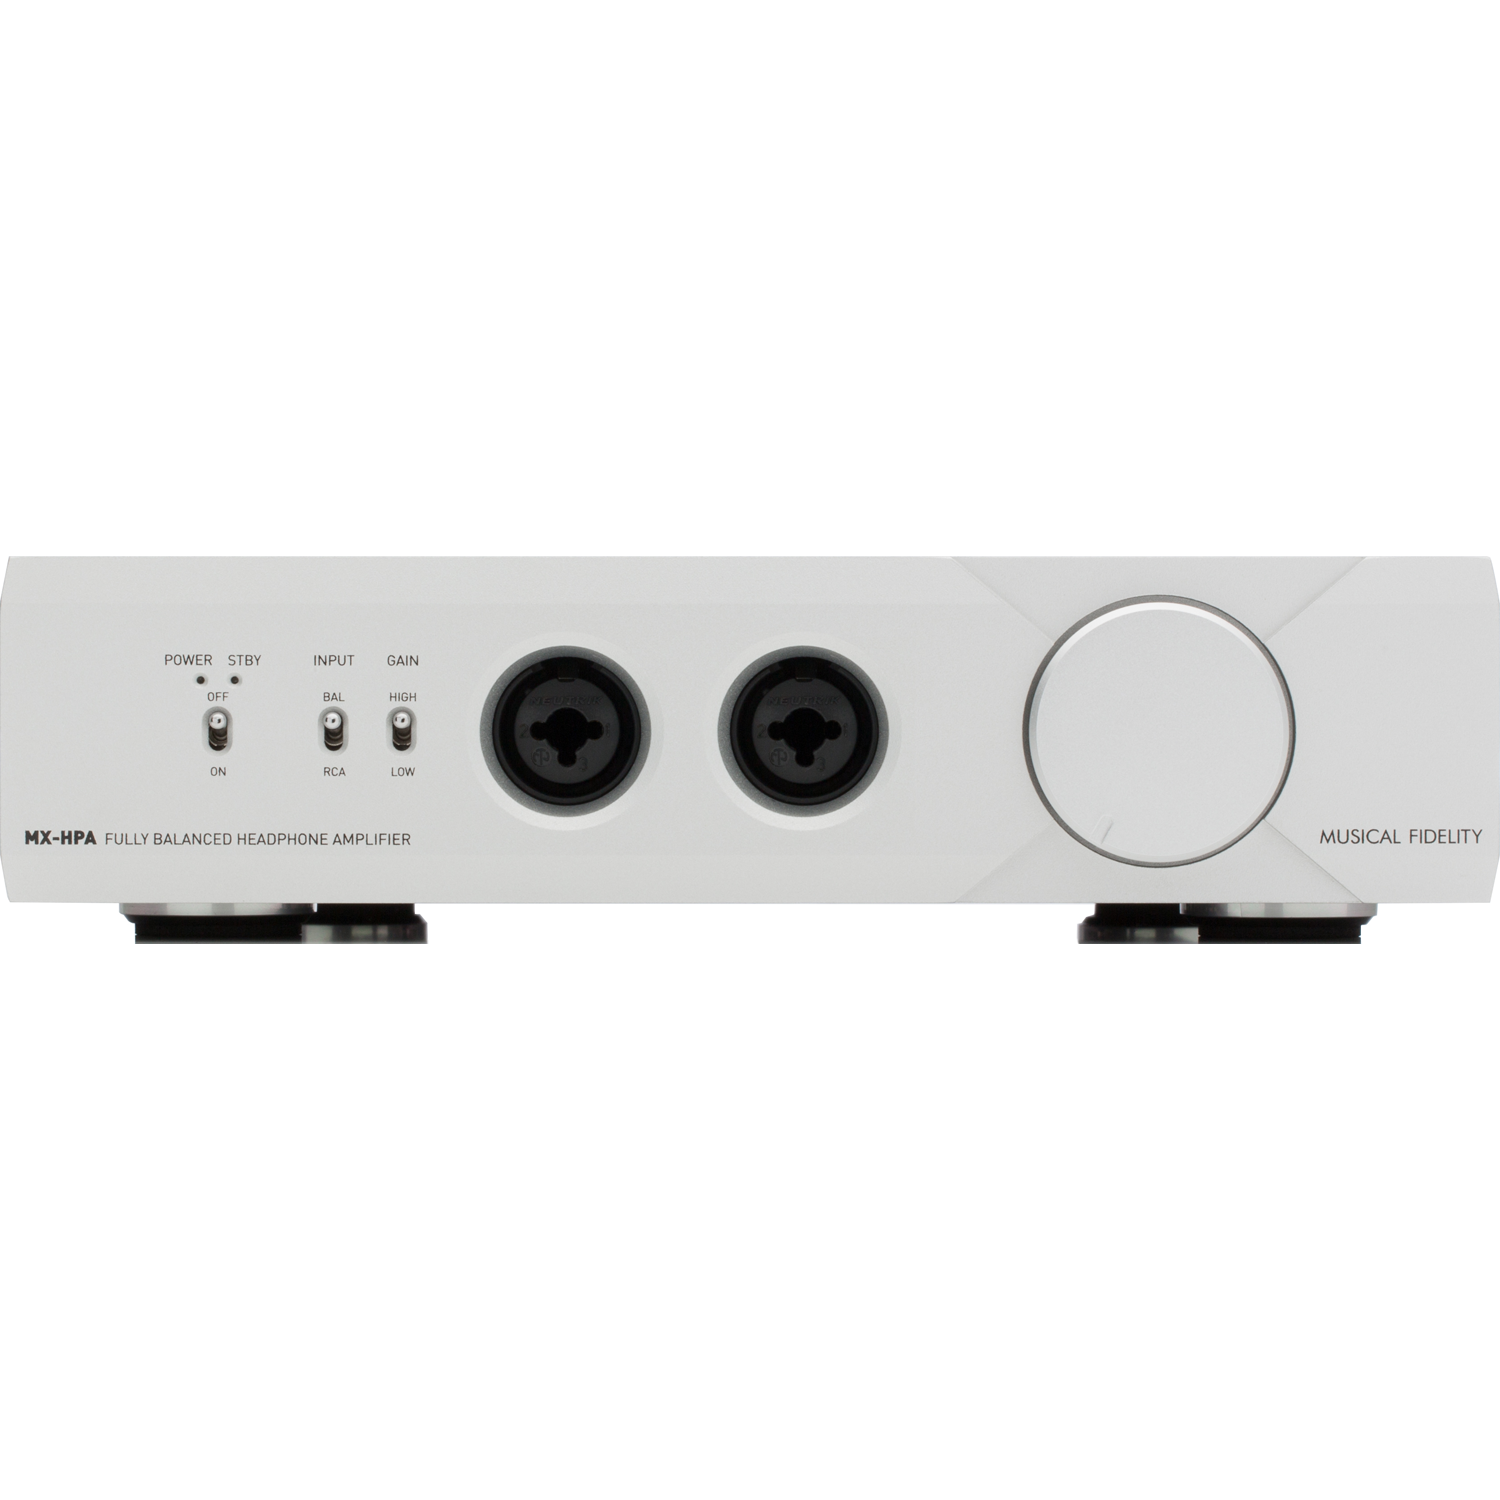 MUSICAL FIDELITY MX-HPA Headphone Amplifier Silver